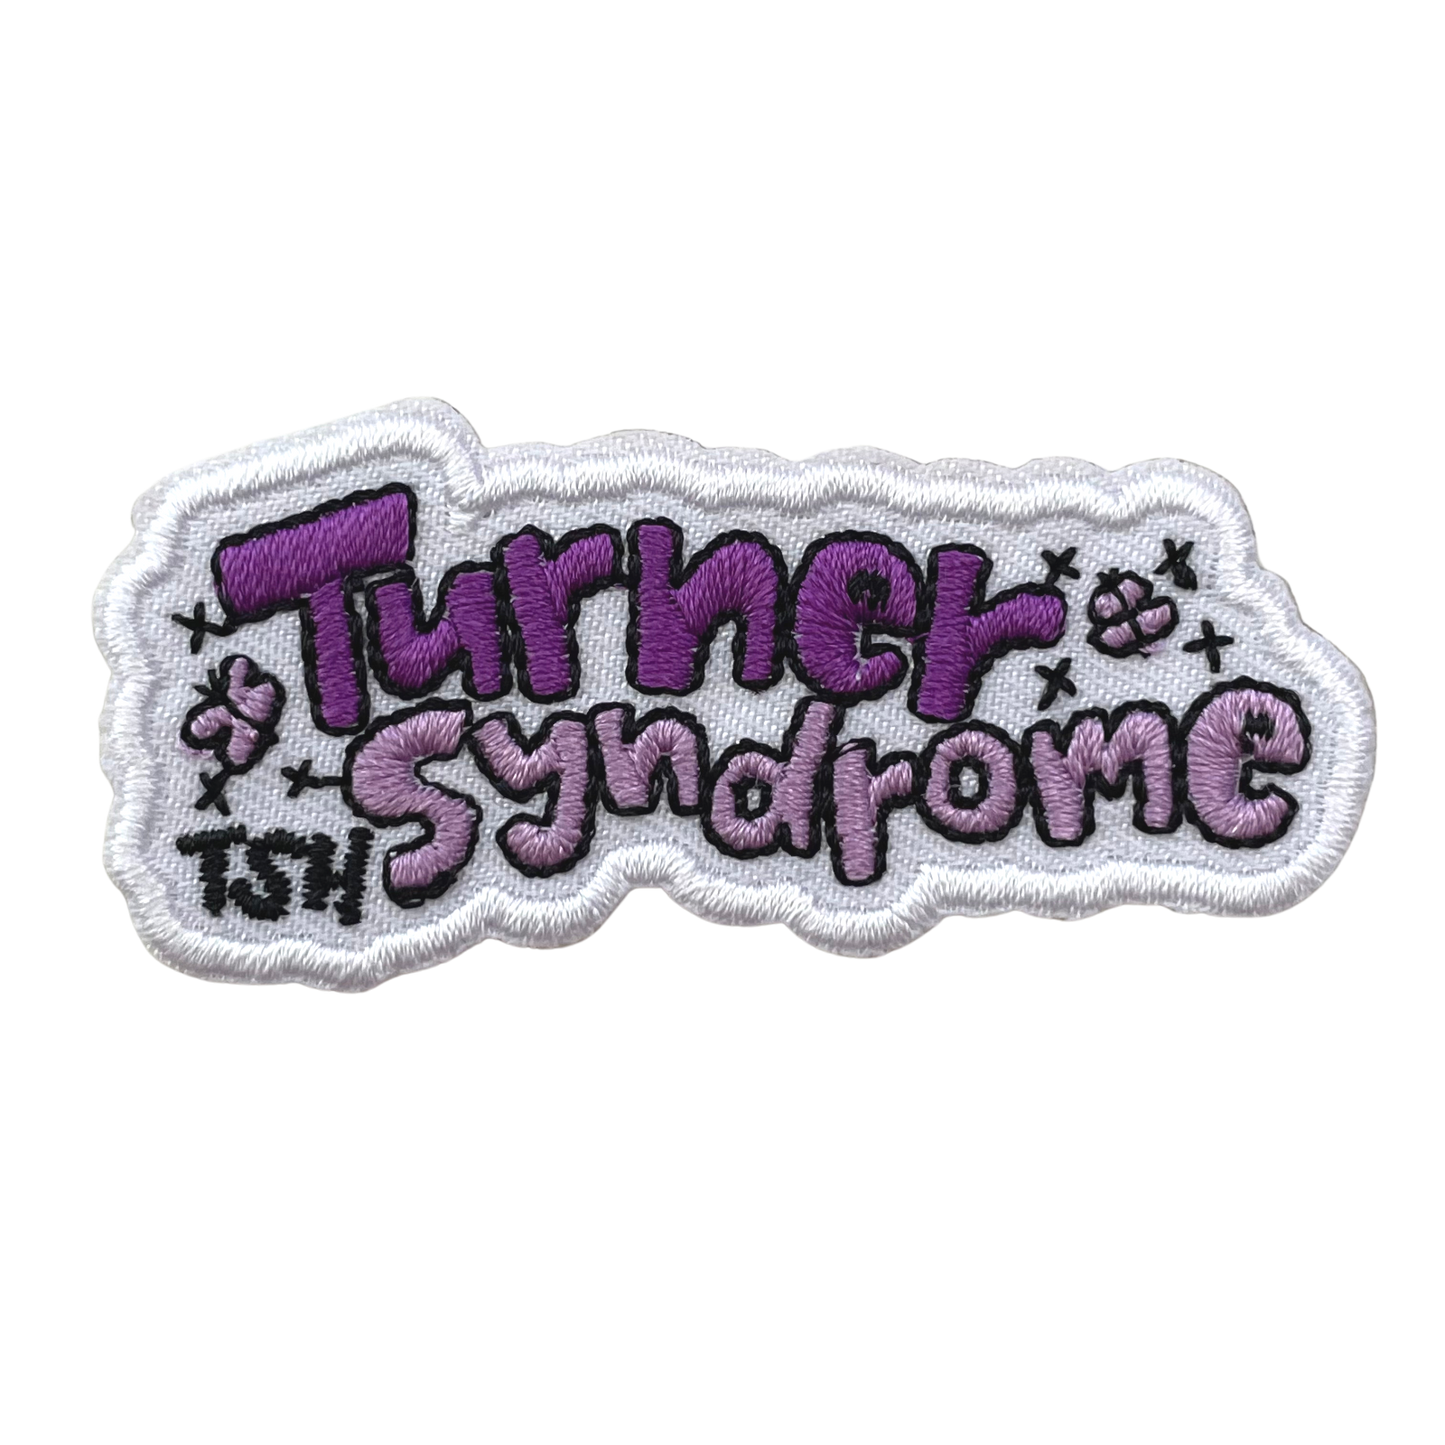 Turner Syndrome Patch - TinySuperheroes